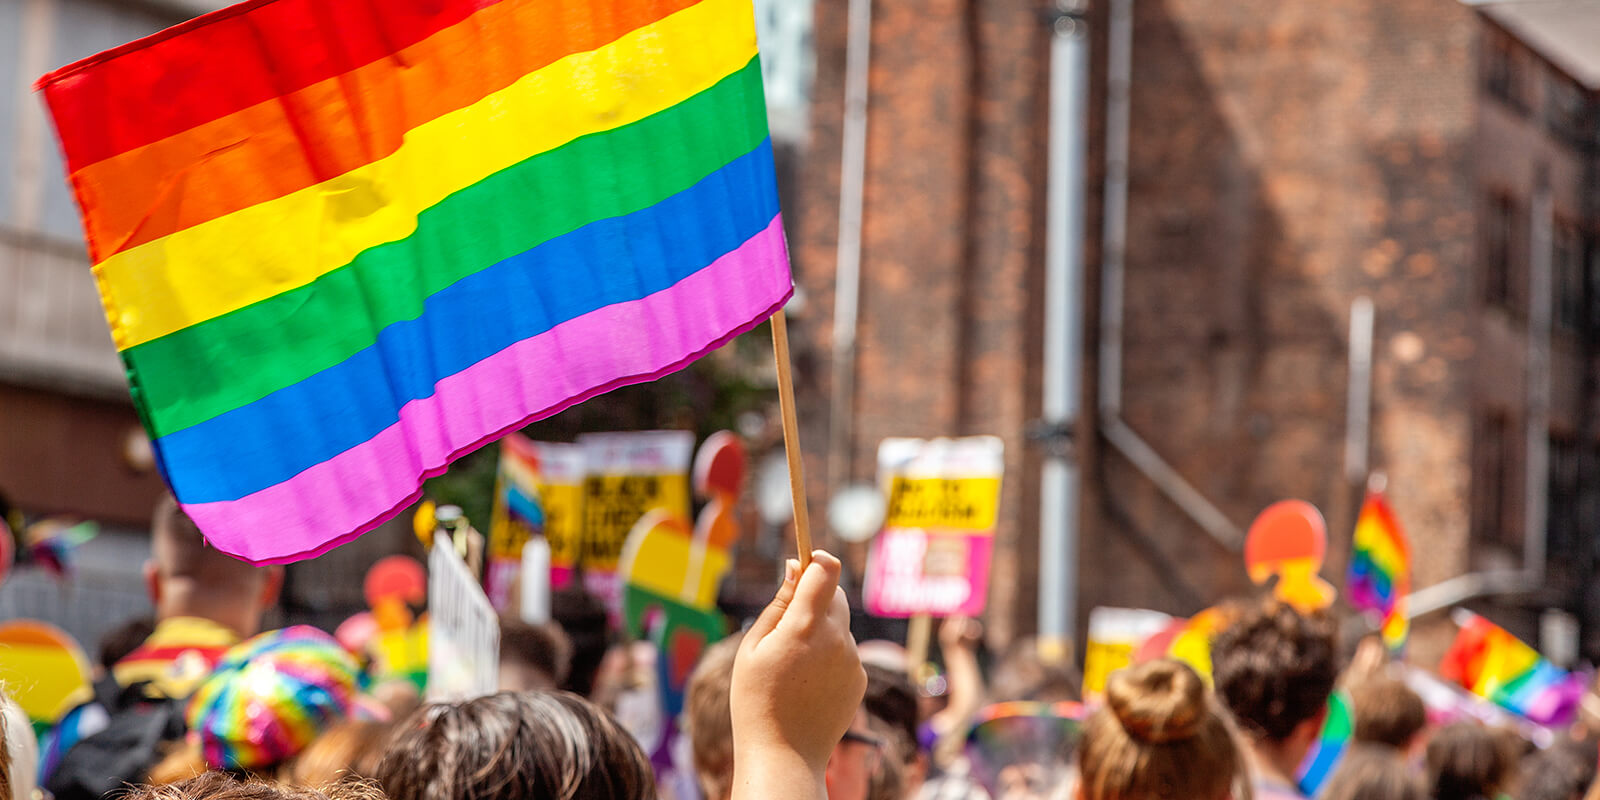 LGBTQ rights and labor rights are intrinsically linked